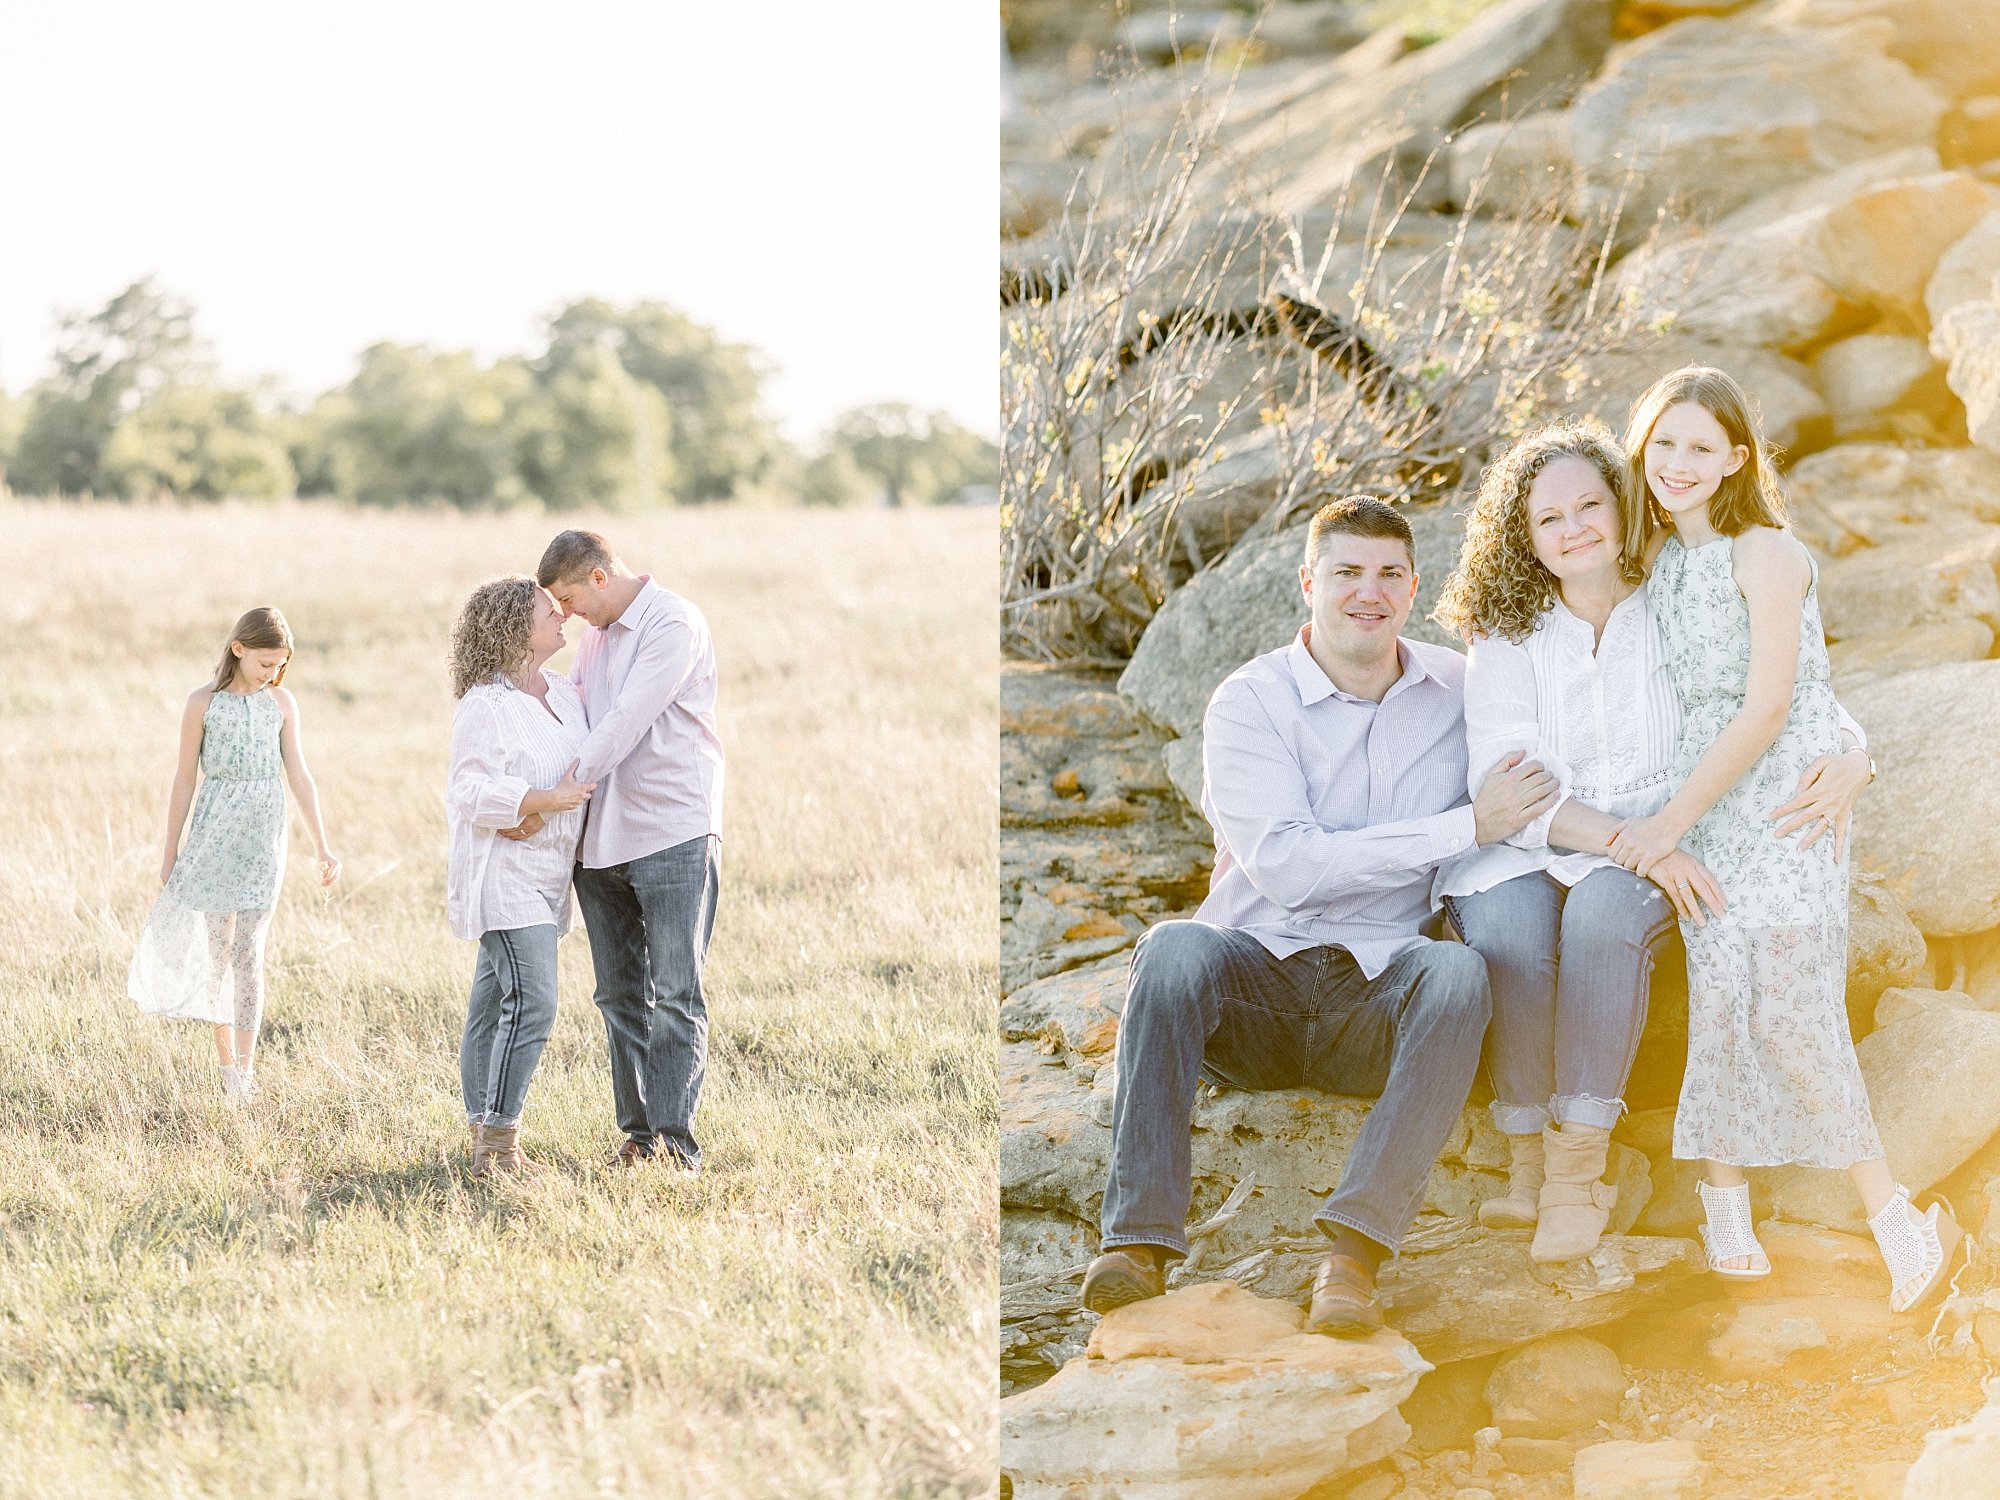 Dallas Fort Worth Family Photographer